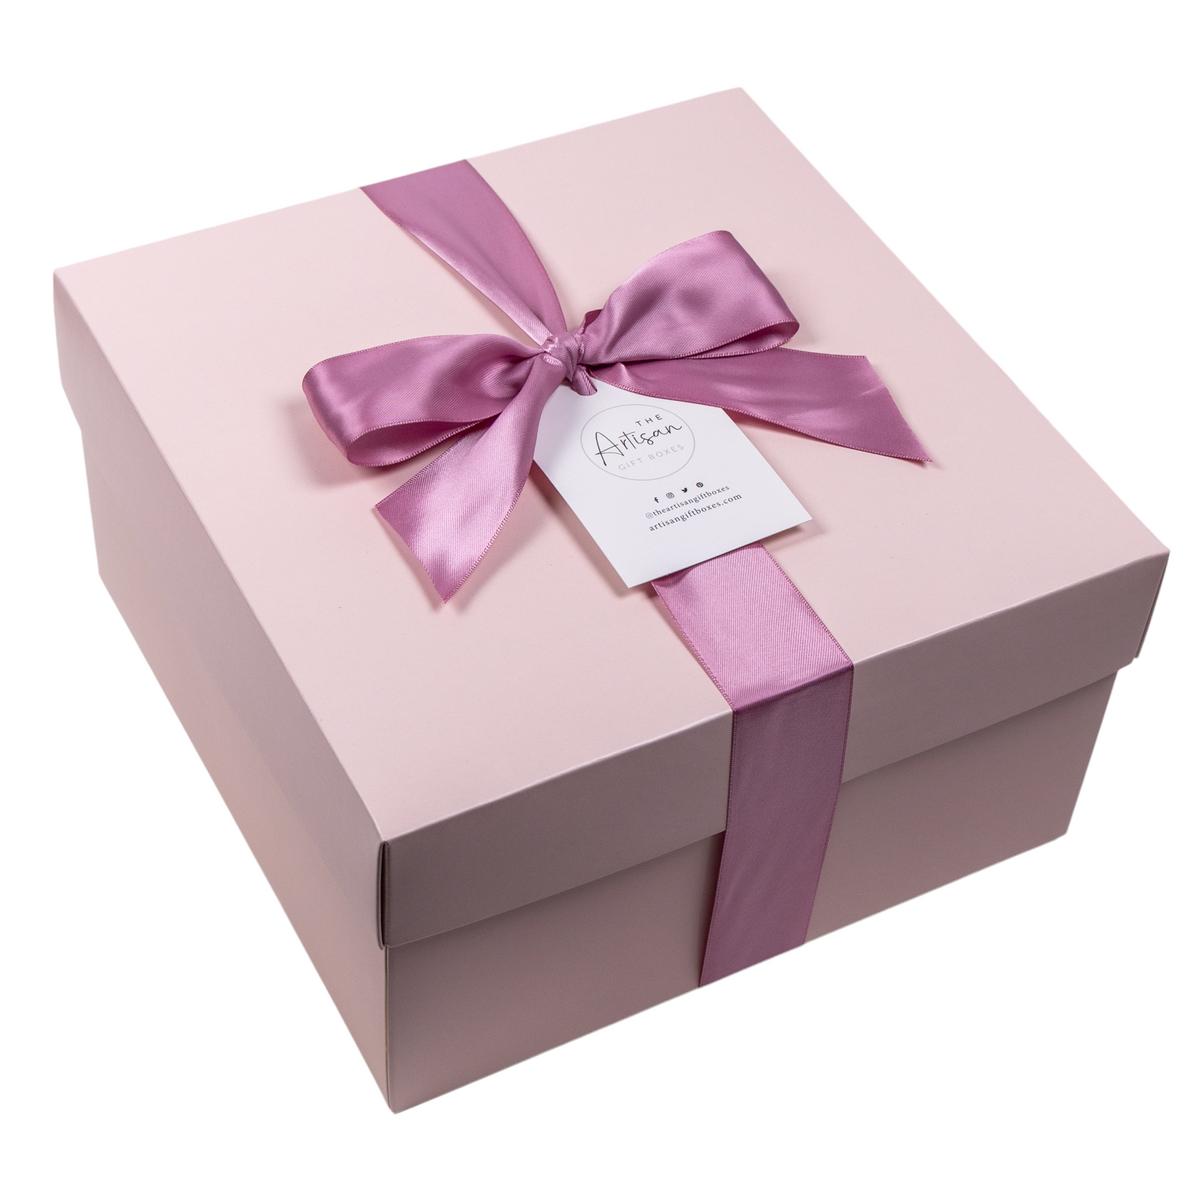 Luxurious Gift Box for Her